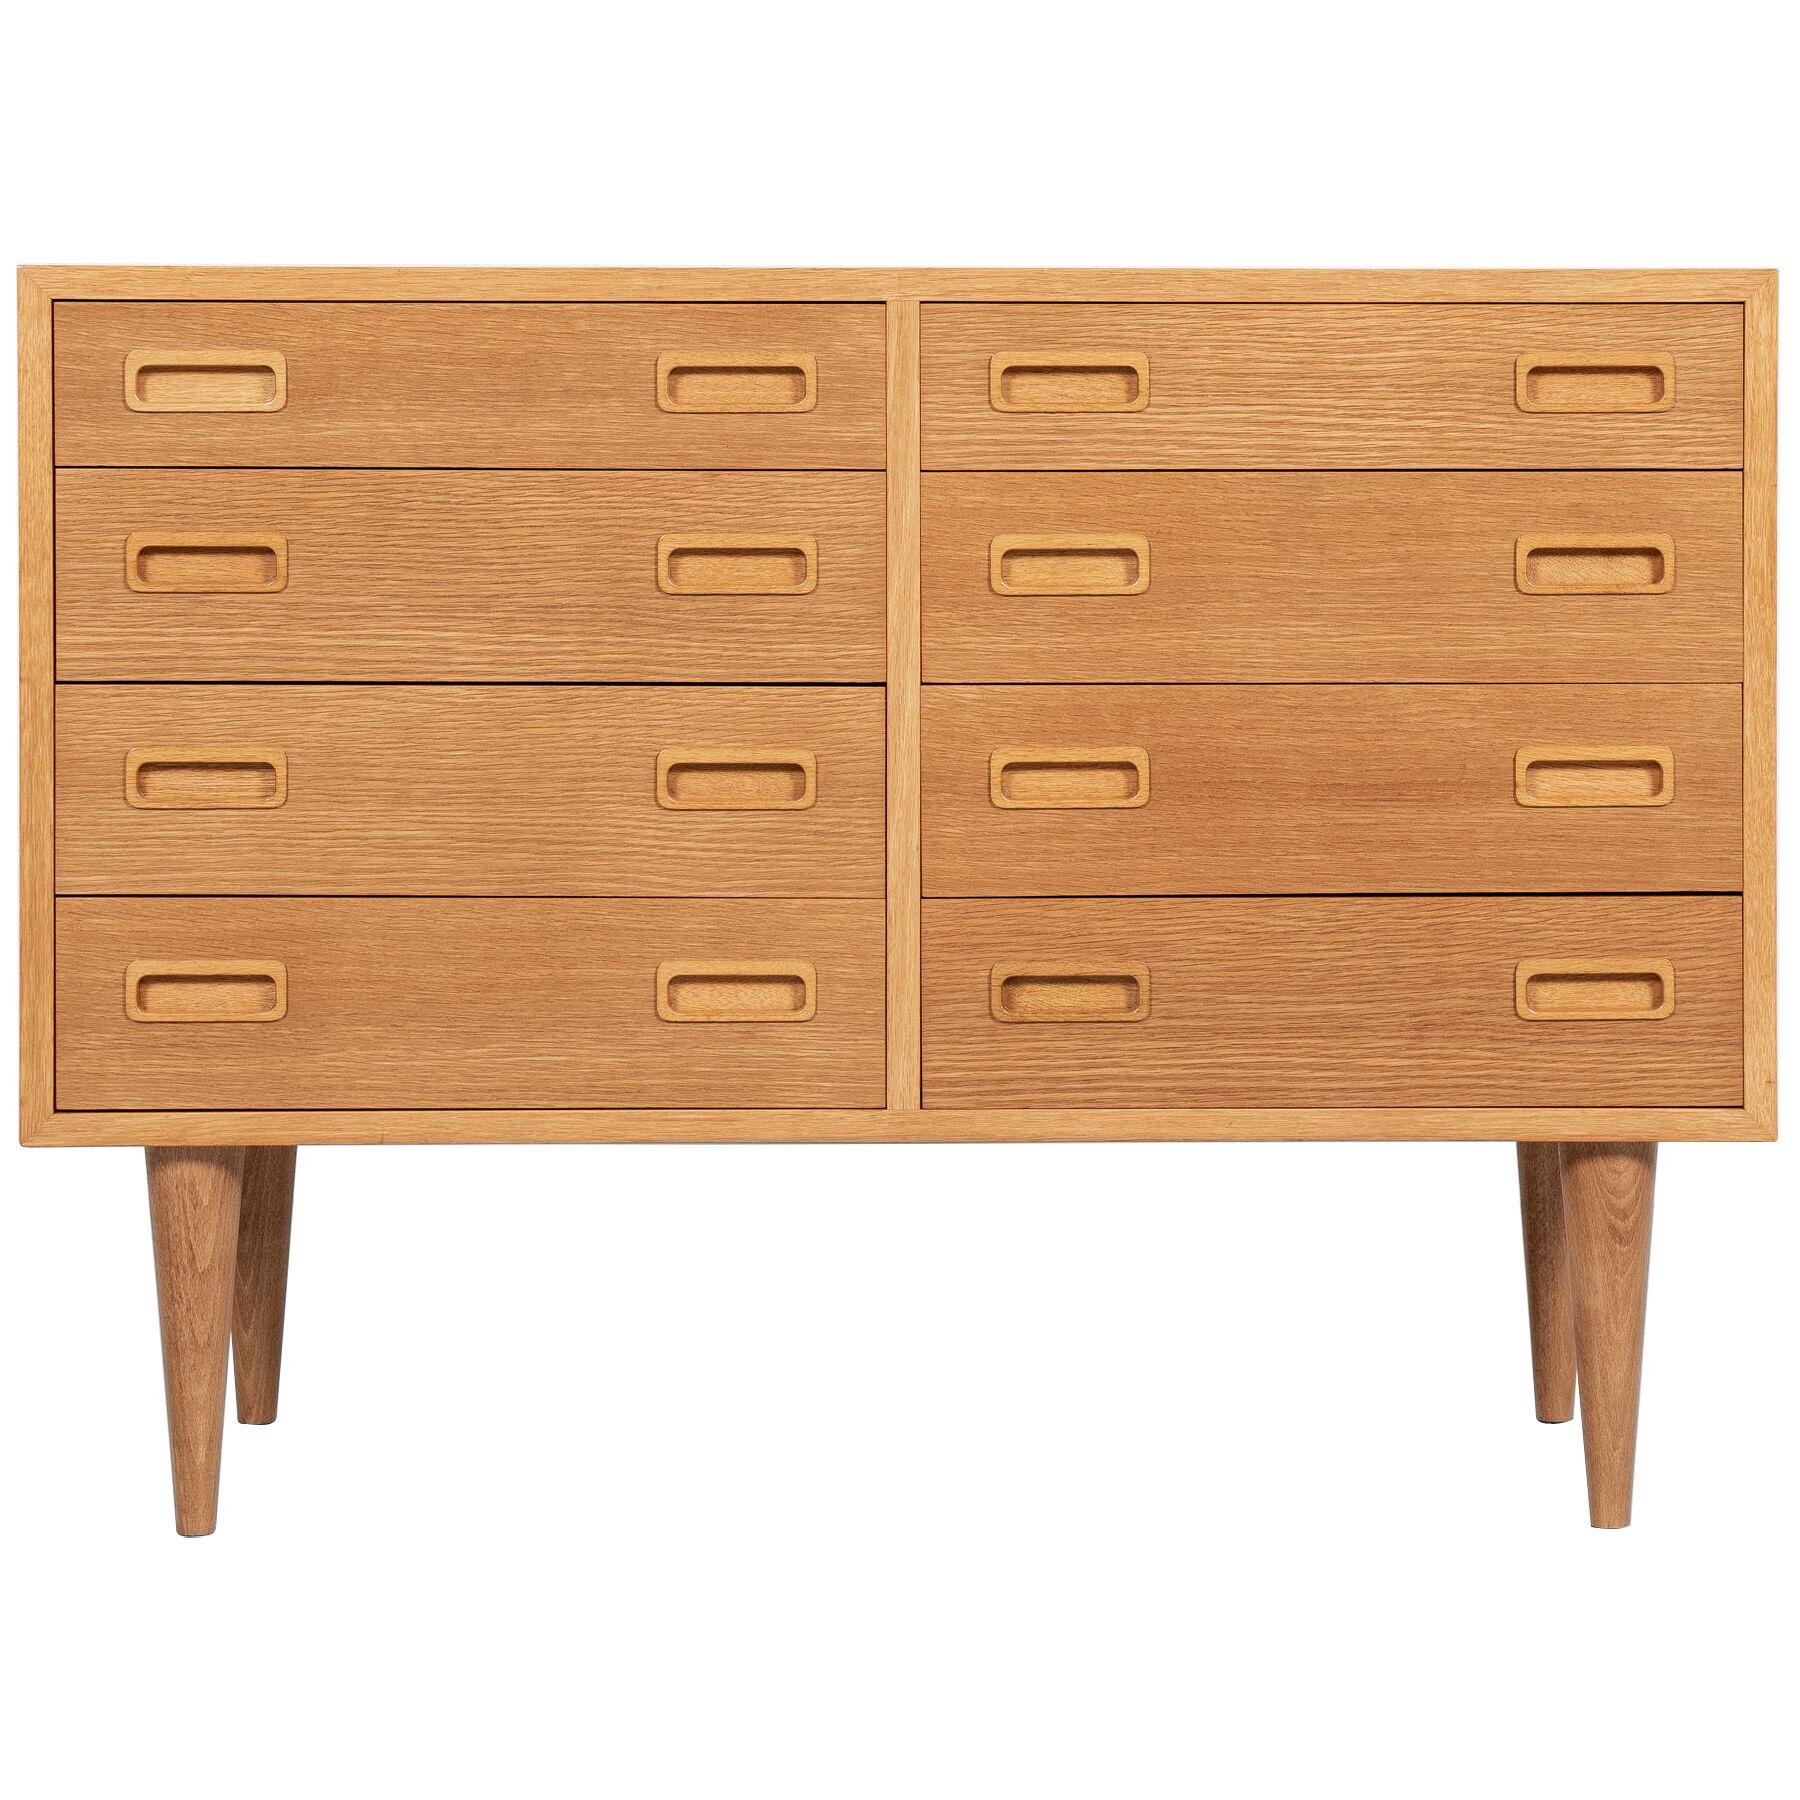 Midcentury Danish chest of 2x4 drawers in oak by Hundevad 1960s